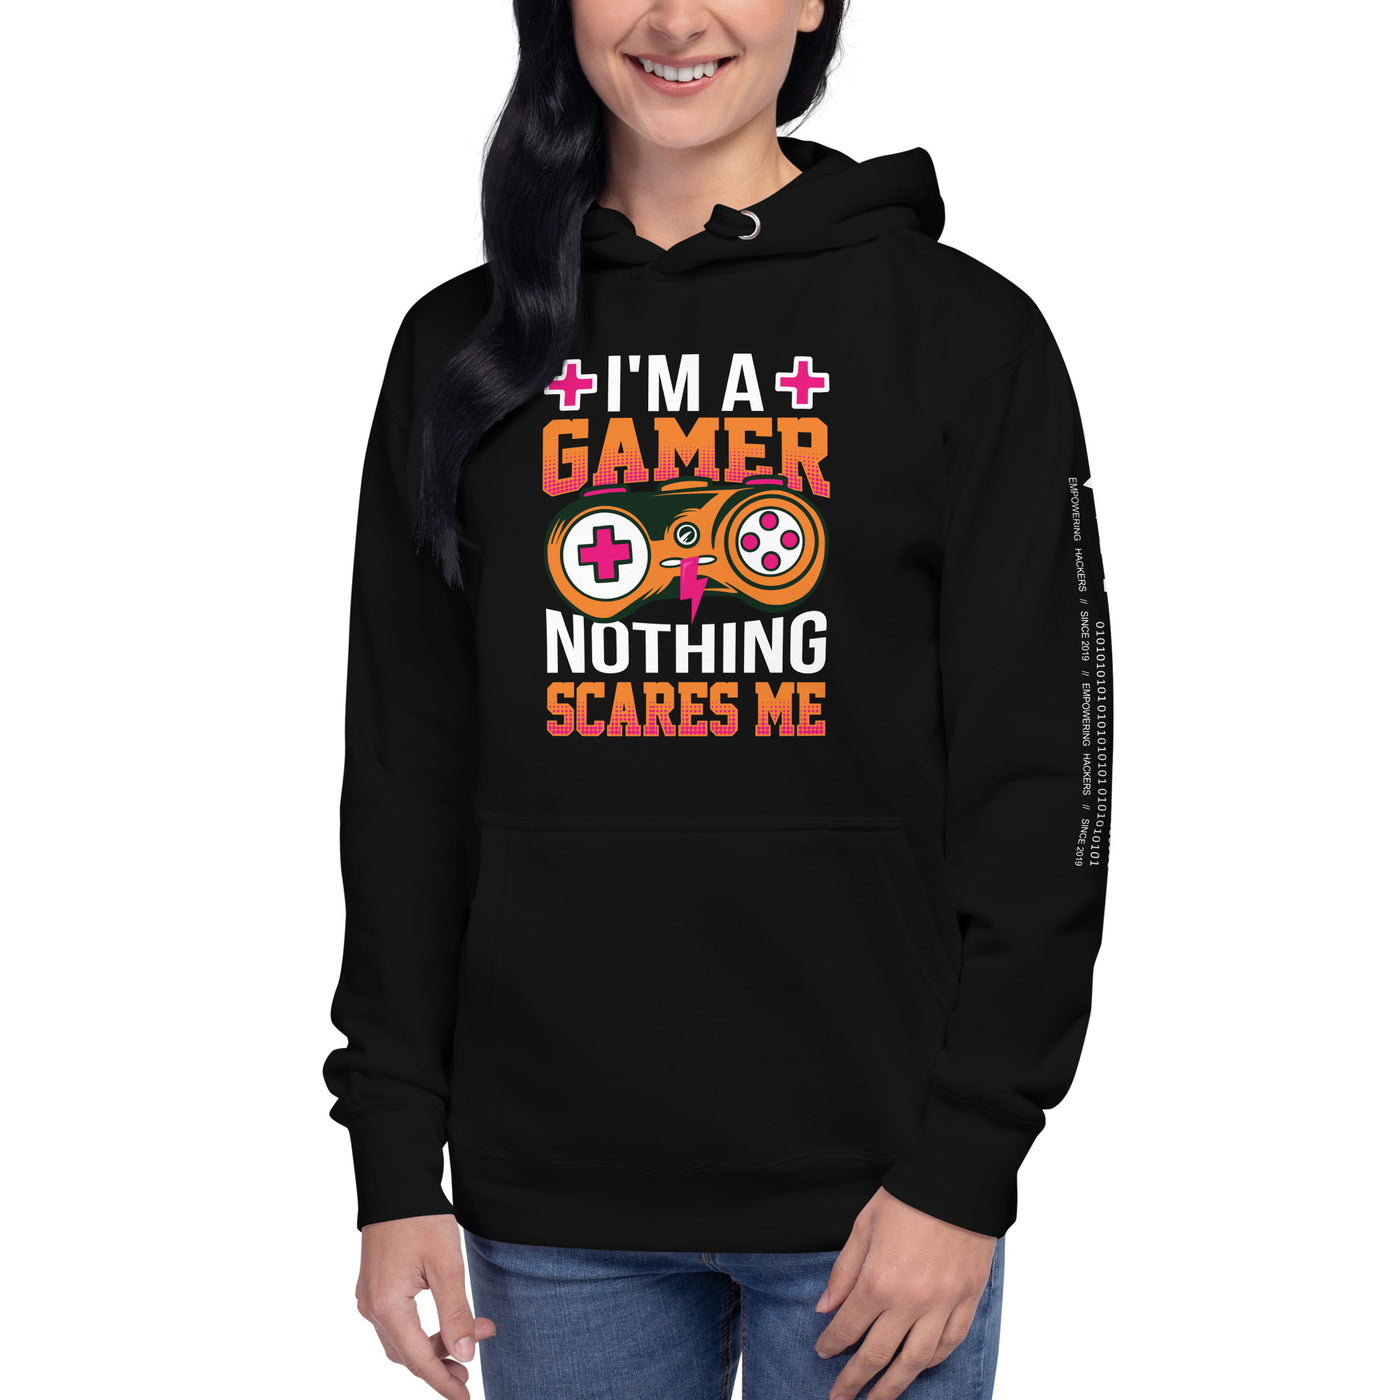 I am a Gamer; Nothing Scares me - Unisex Hoodie